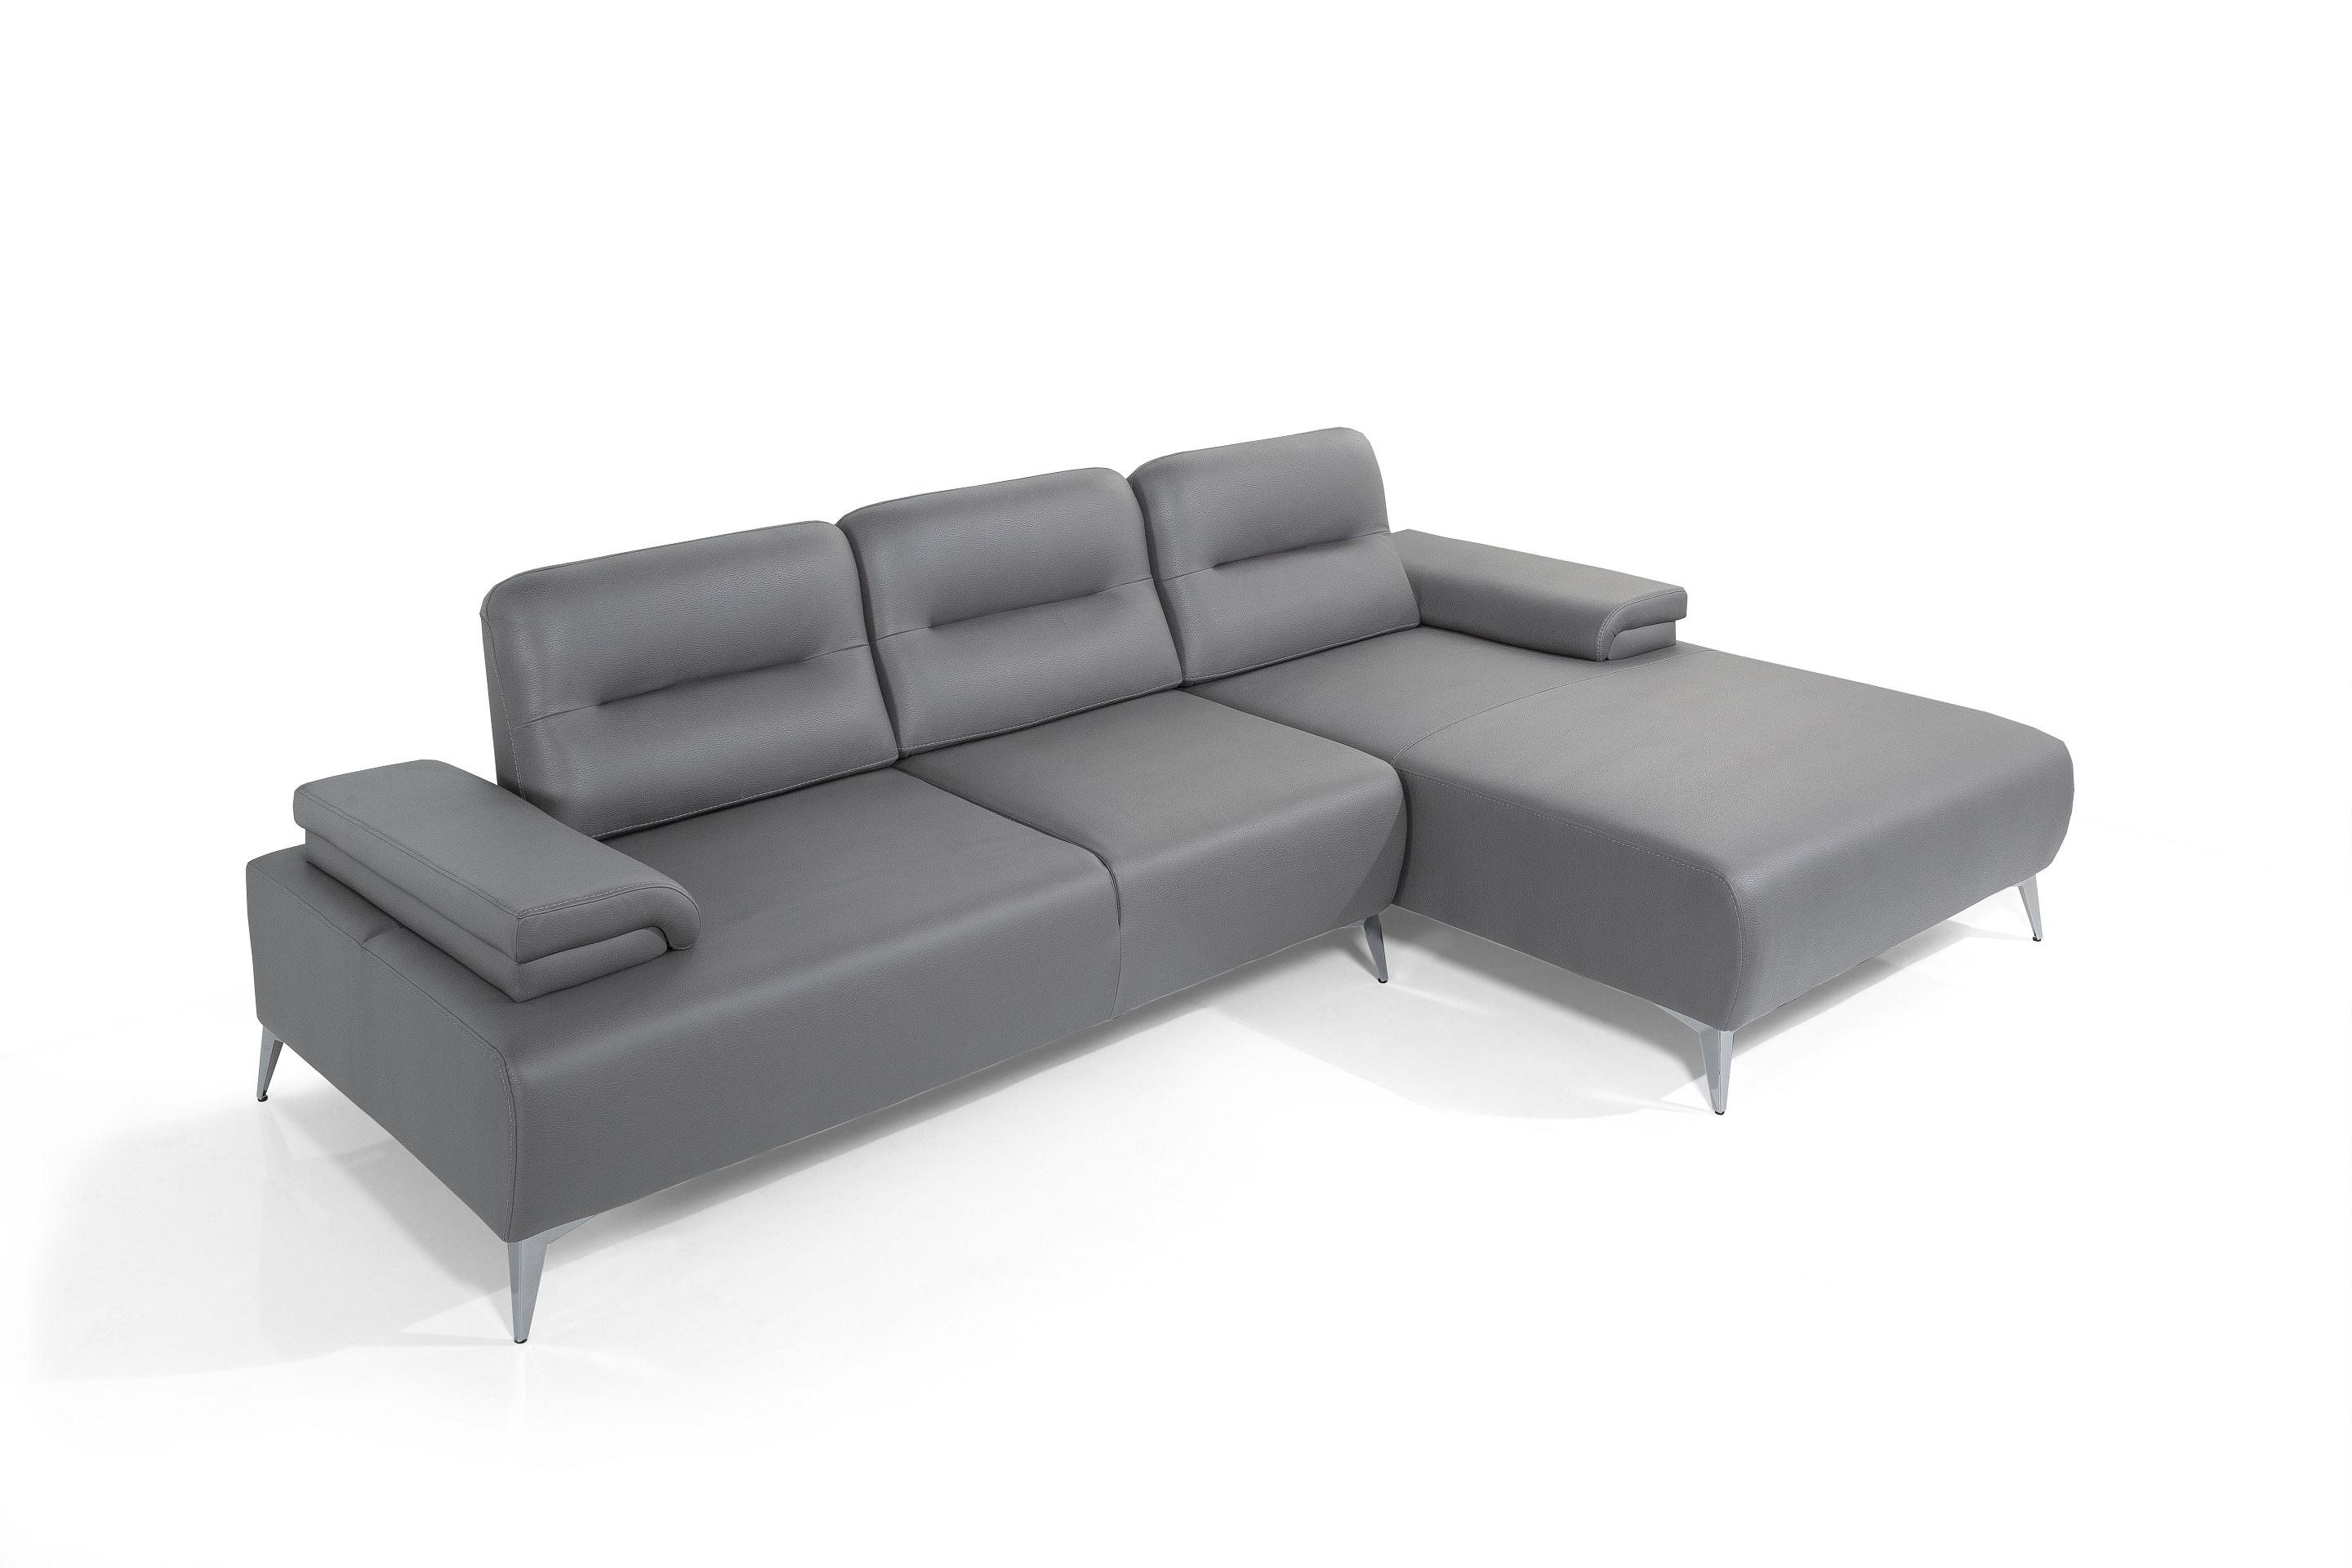 Contemporary Sectional SR1759-LGRY Ruslan SR1759-LGRY in Light Gray 